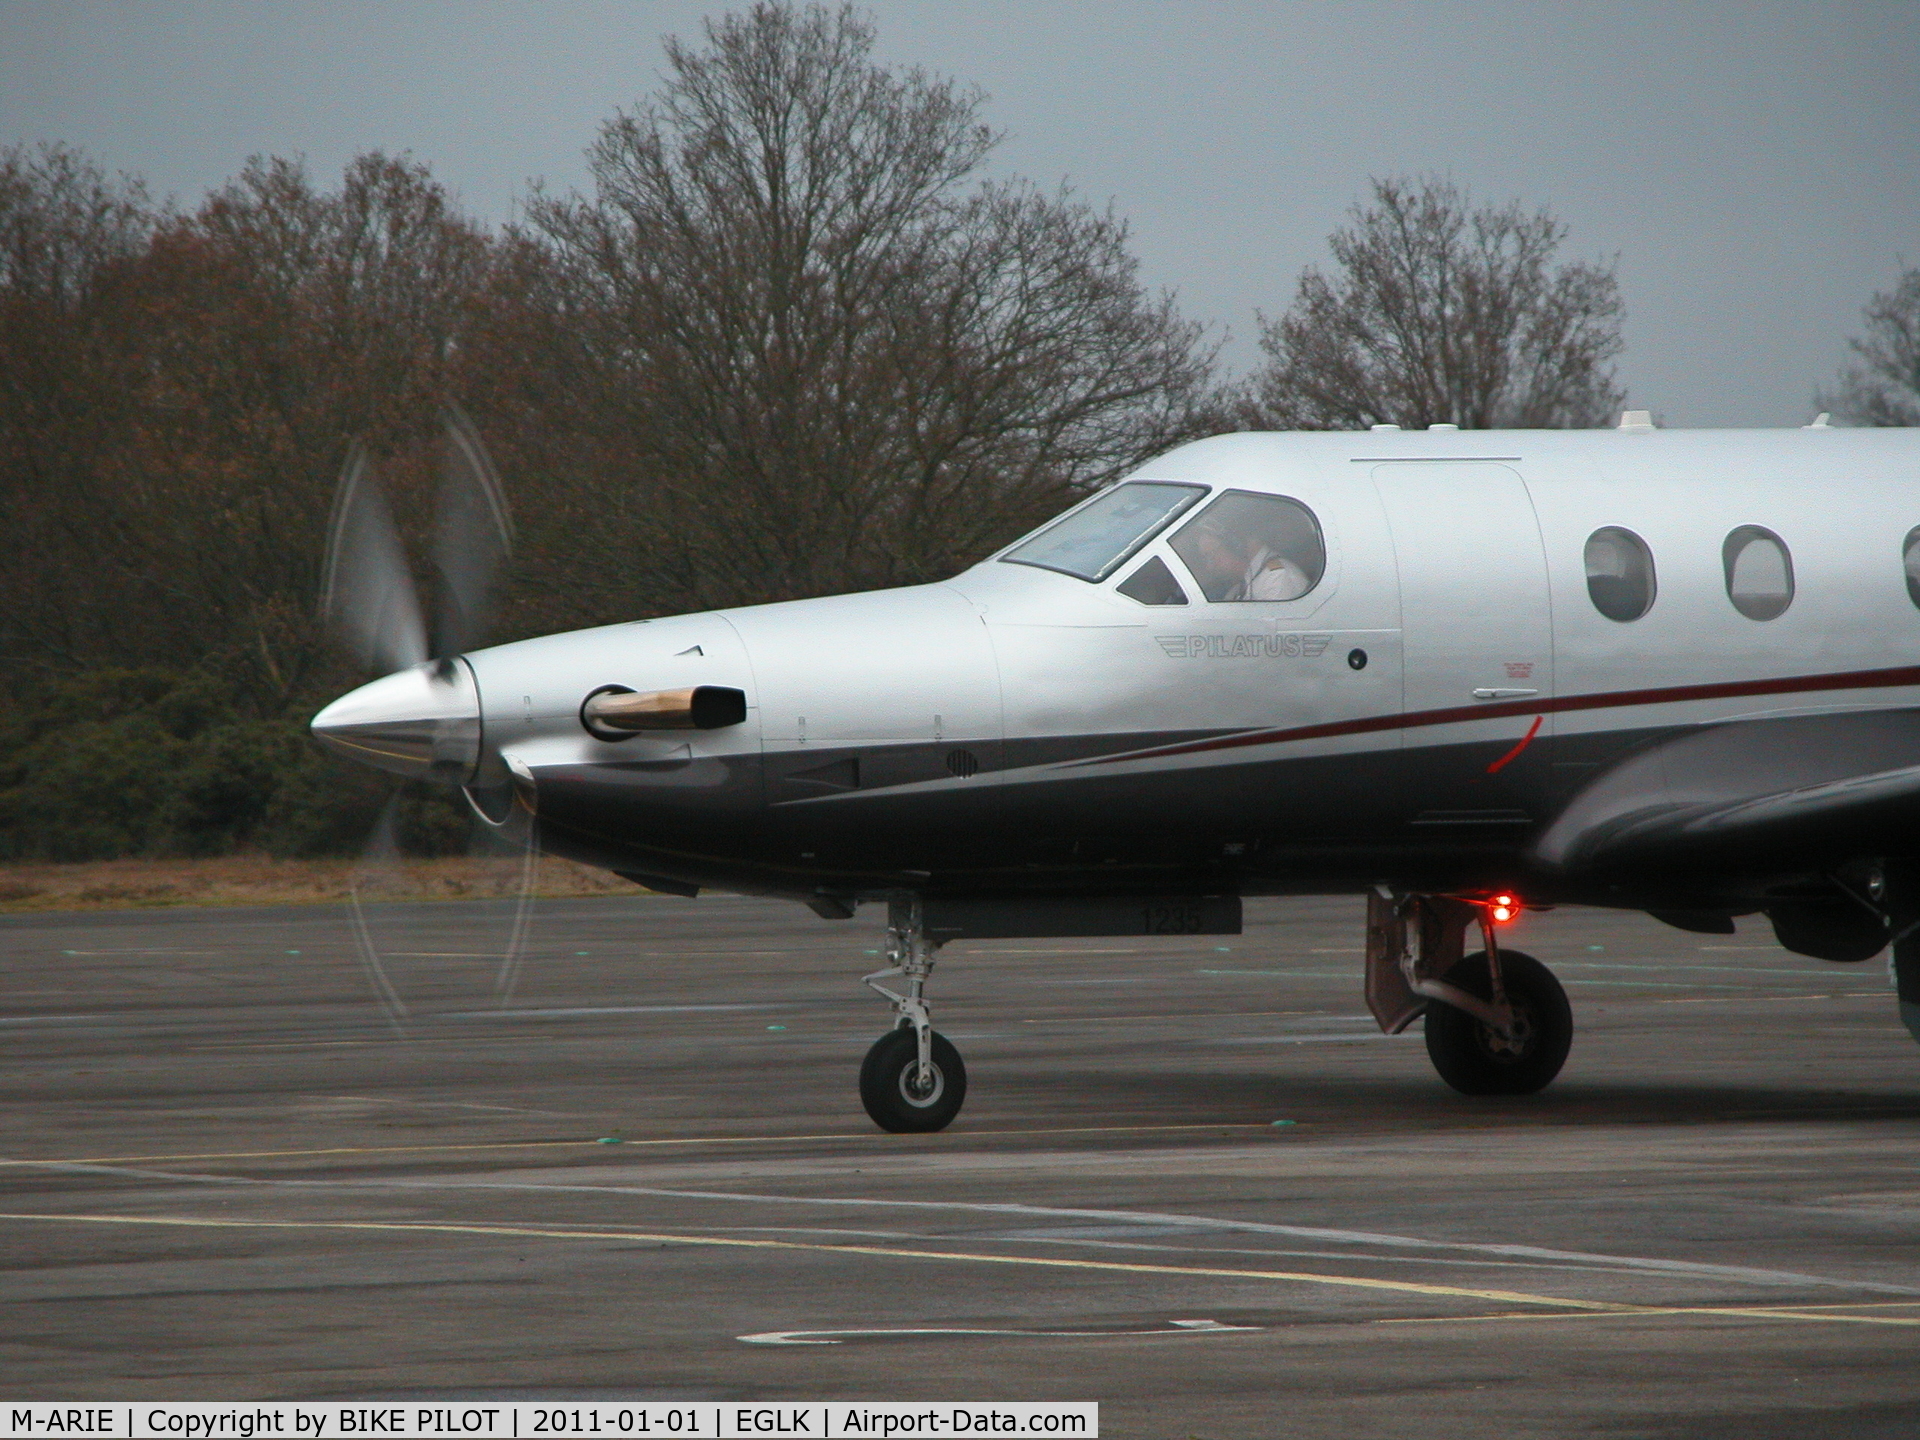 M-ARIE, 2010 Pilatus PC-12/47E C/N 1235, Manx registered PC12 just after start up on the terminal ramp.